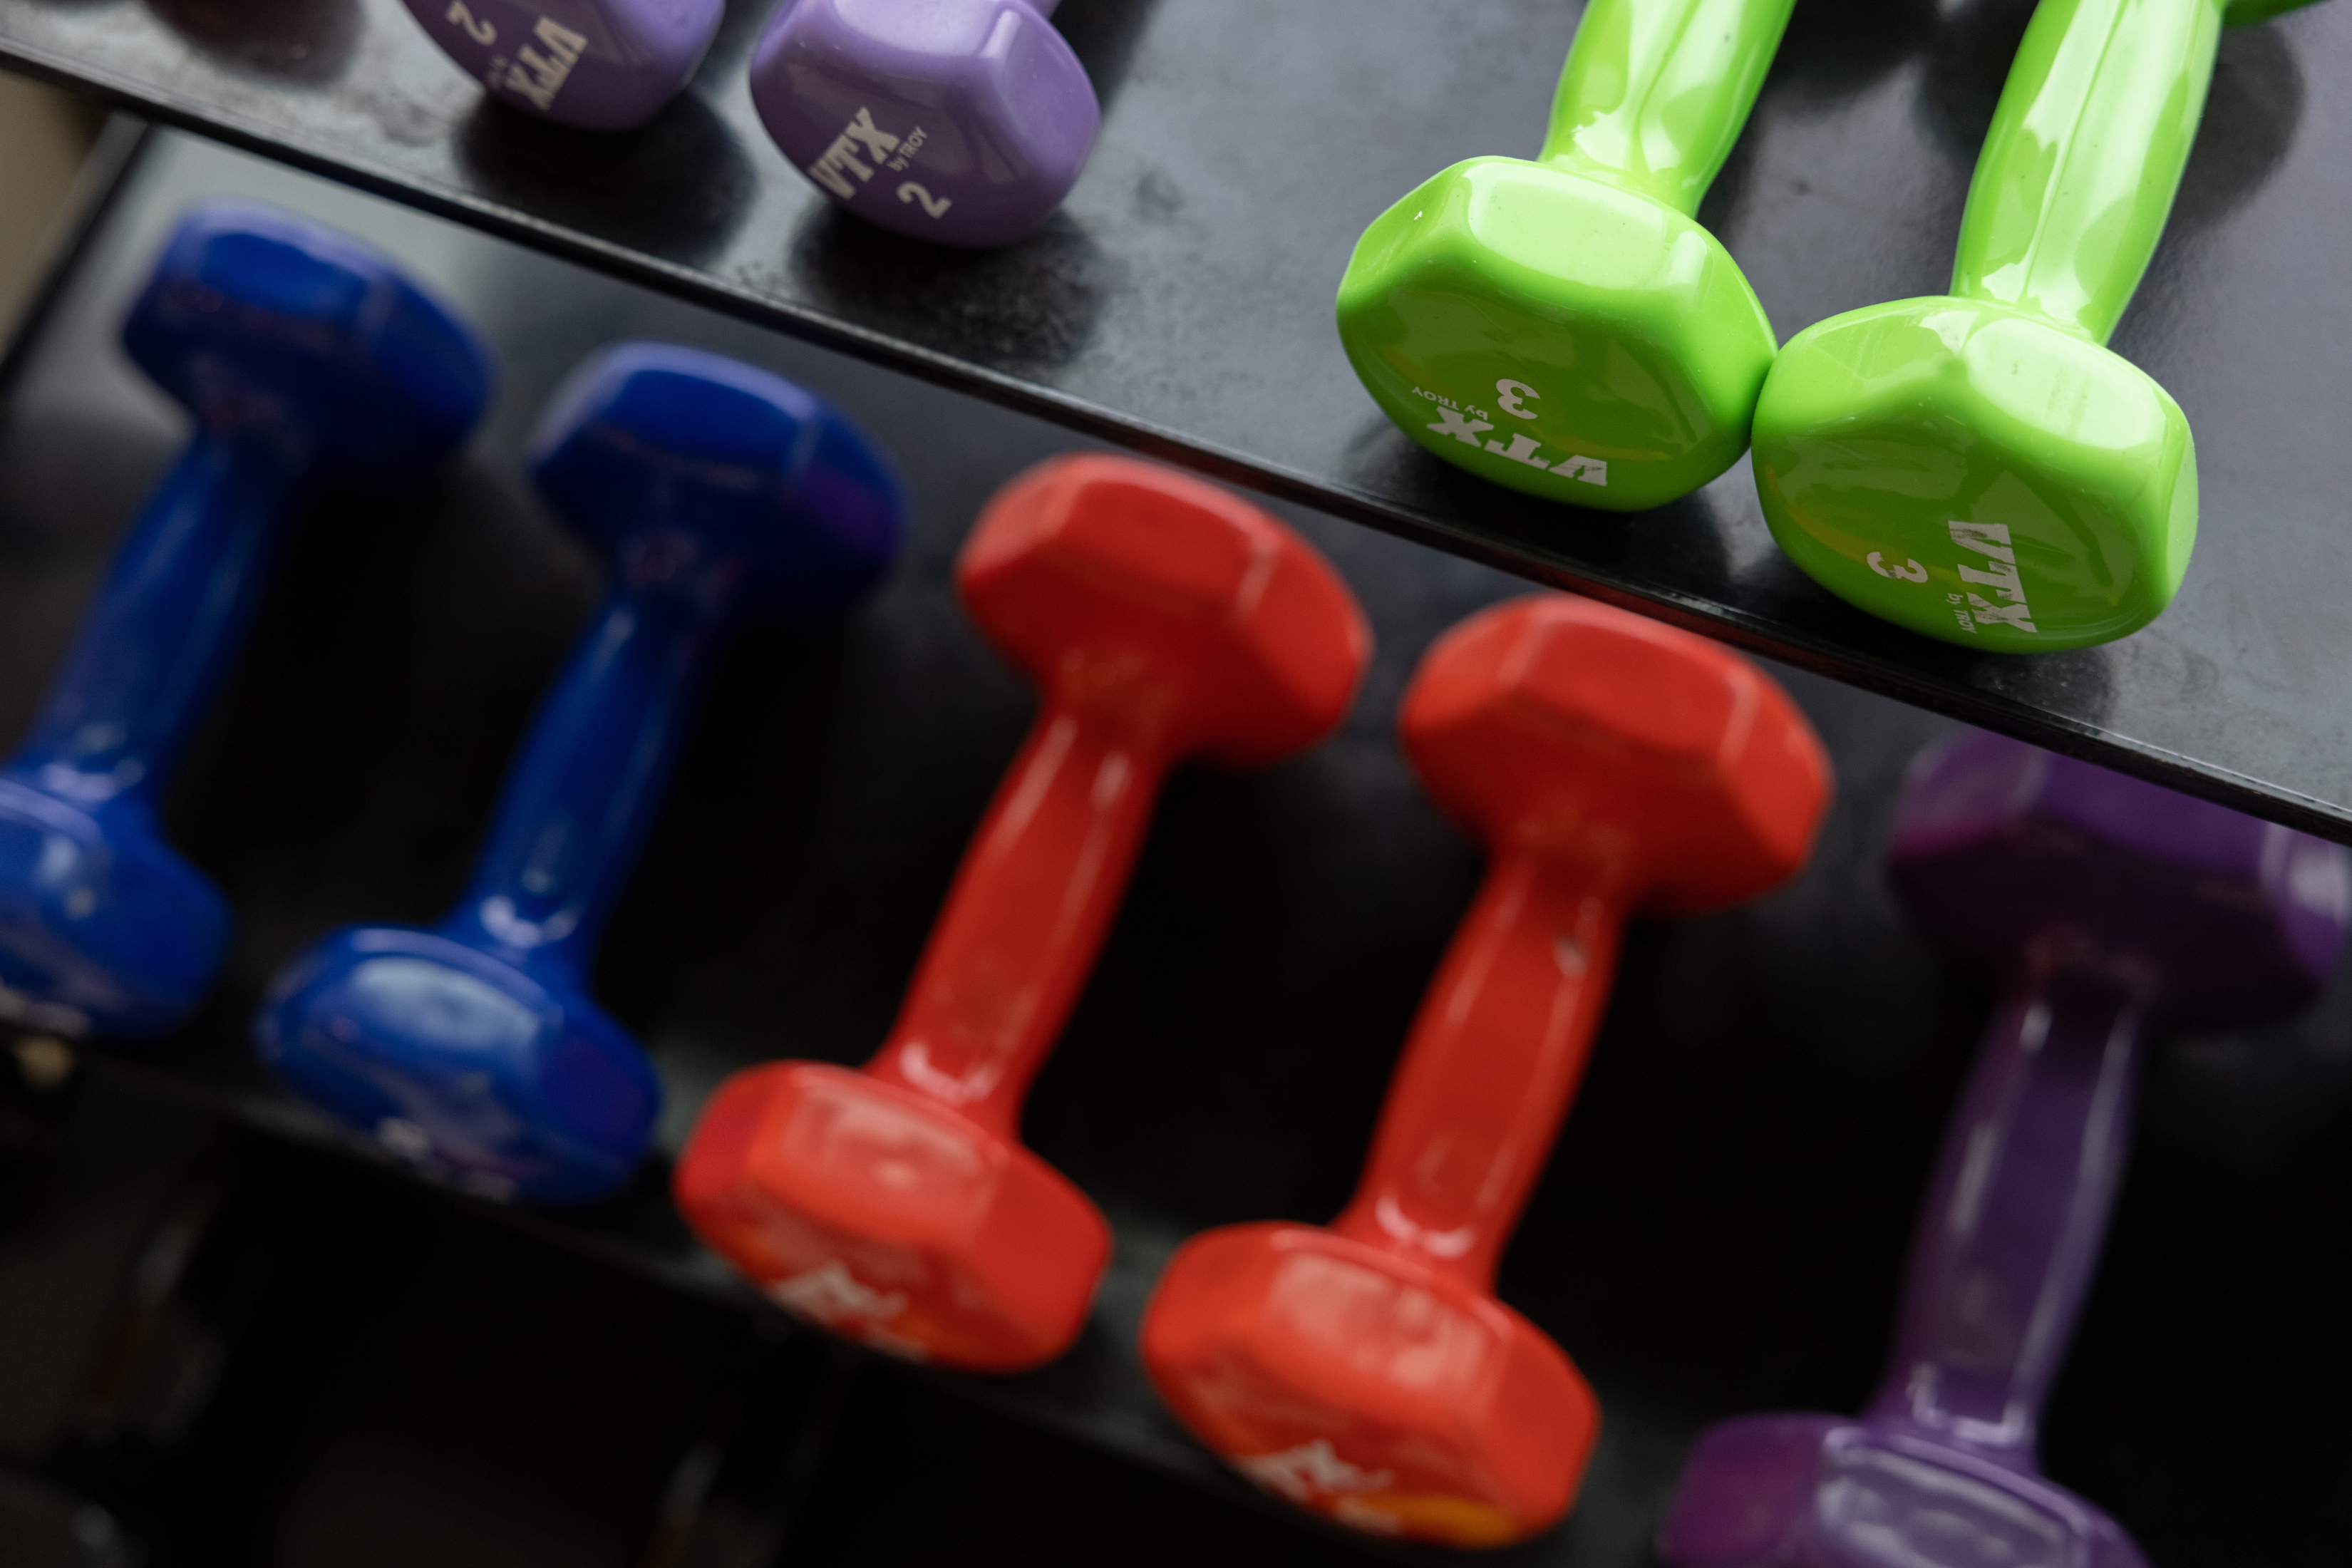 Image of exercise weights